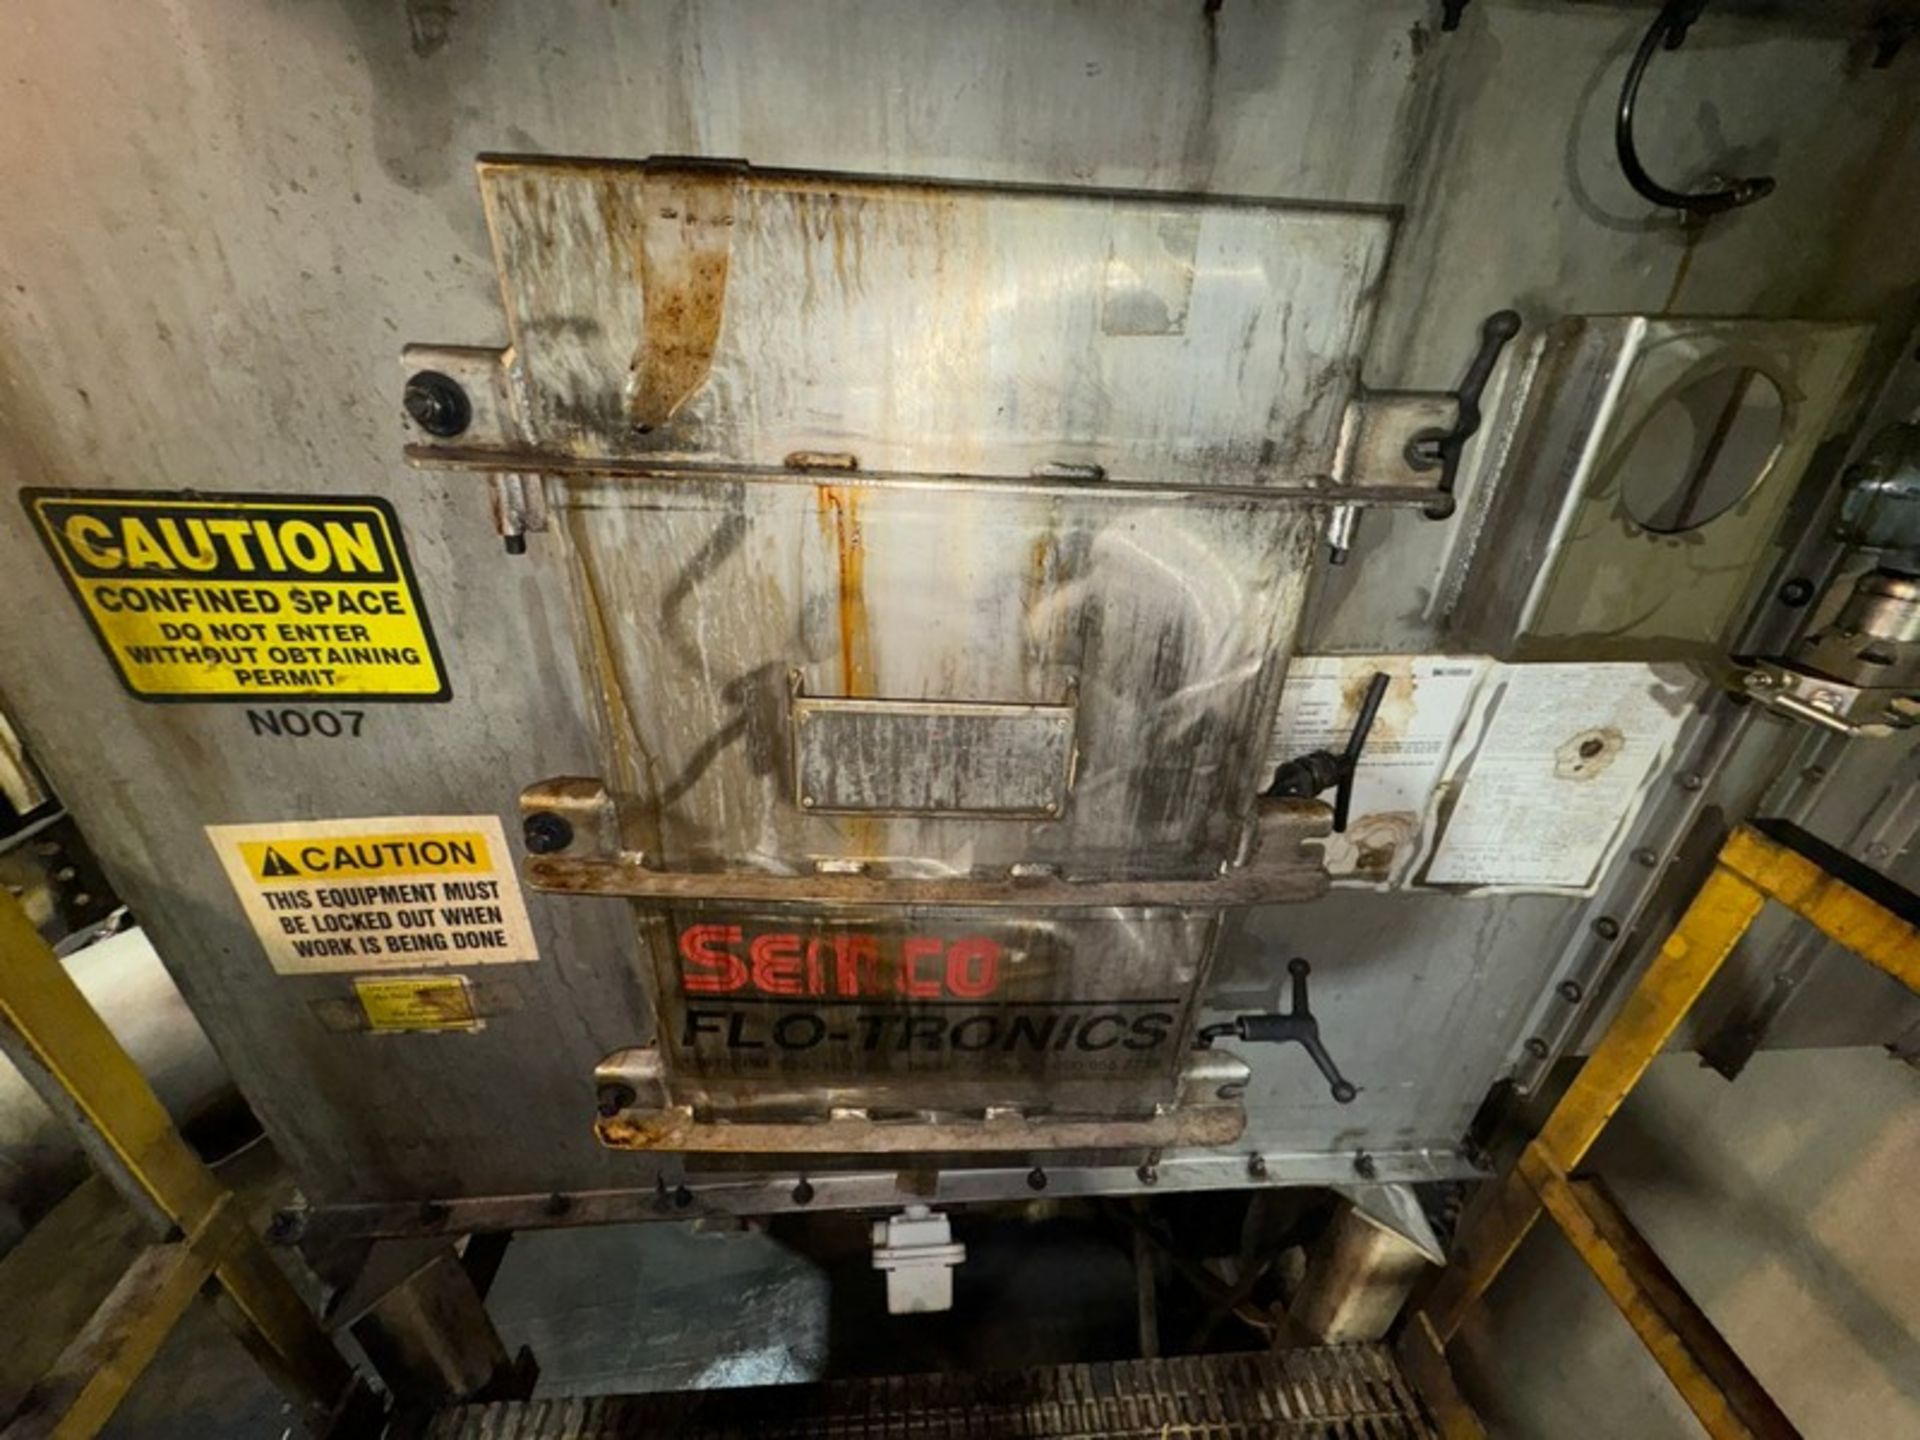 Semco Flo-Tronics S/S Dust Collector, Mounted on Mild Steel Frame (LOCATED IN FREEHOLD, N.J.) - Image 10 of 11